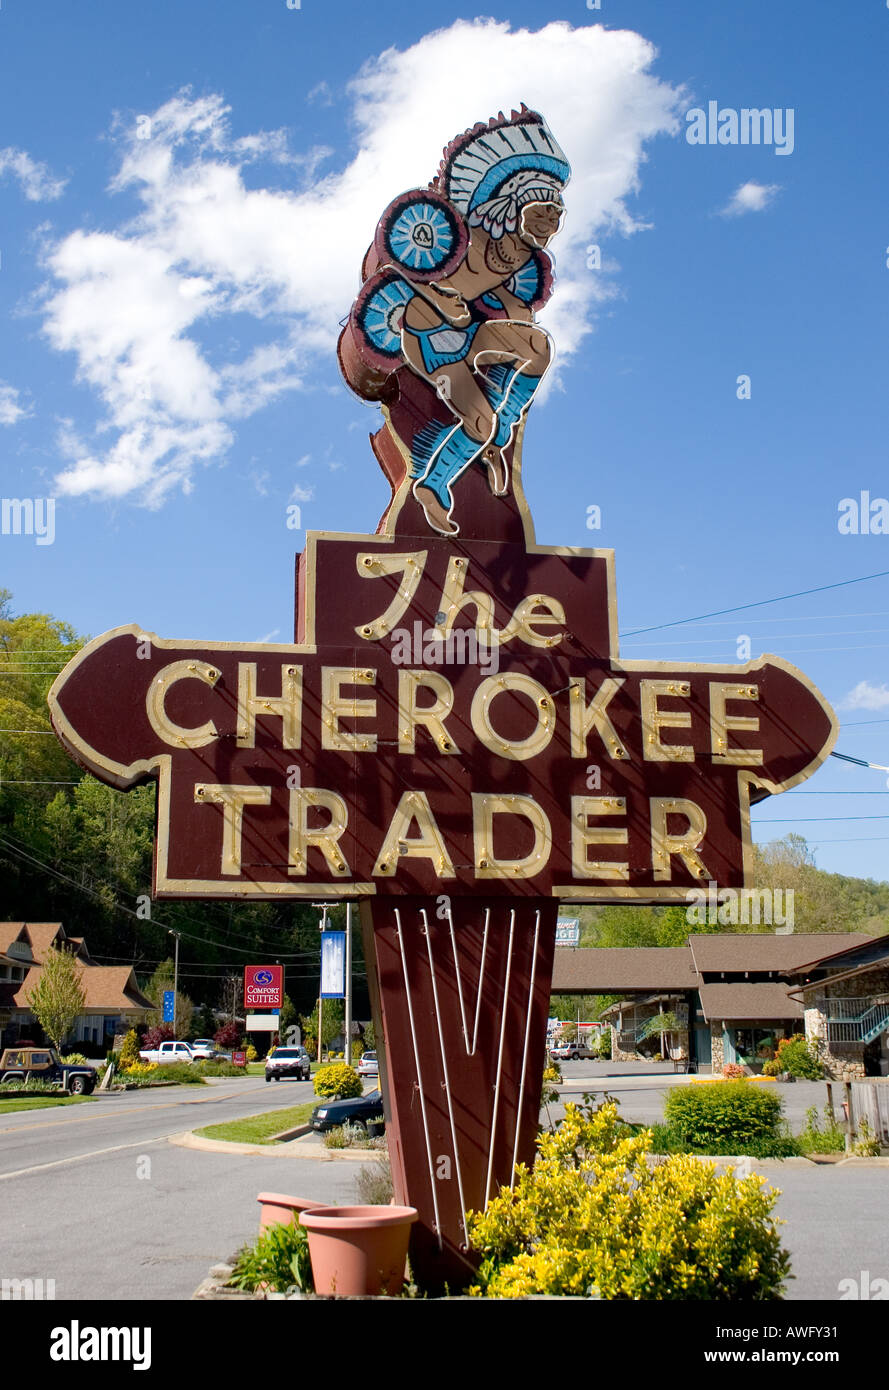 The Cherokee Trader sign at a gift shop in the Smoky Mountains in Cherokee North Carolina Stock Photo